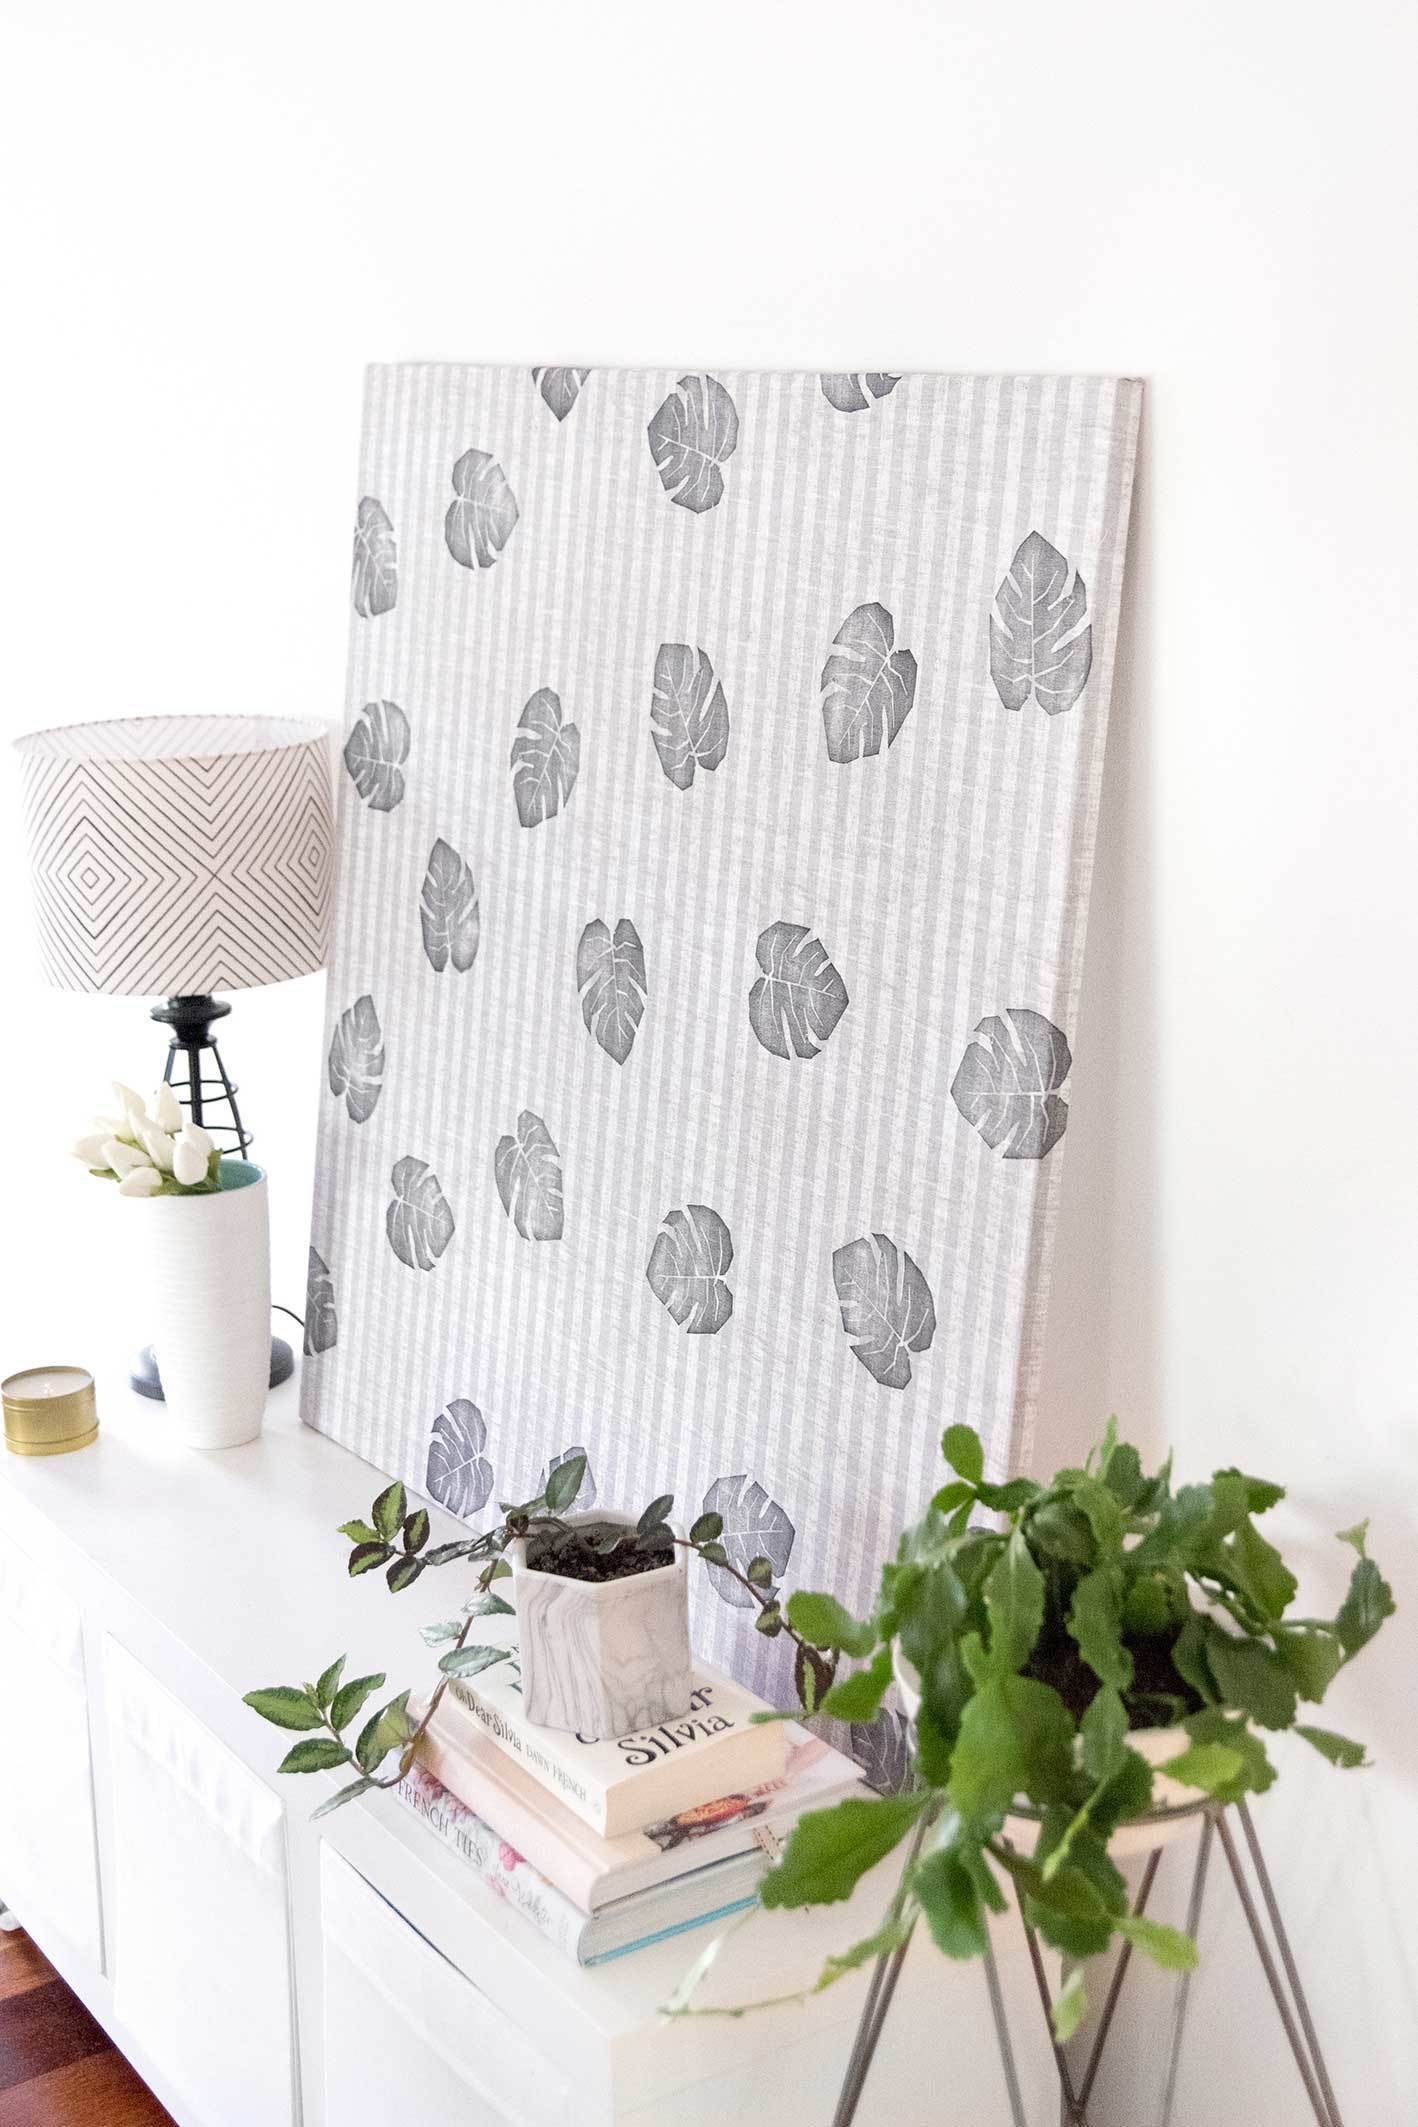 Stretched fabric wall art: An easy way to make beautiful art without breaking the bank!